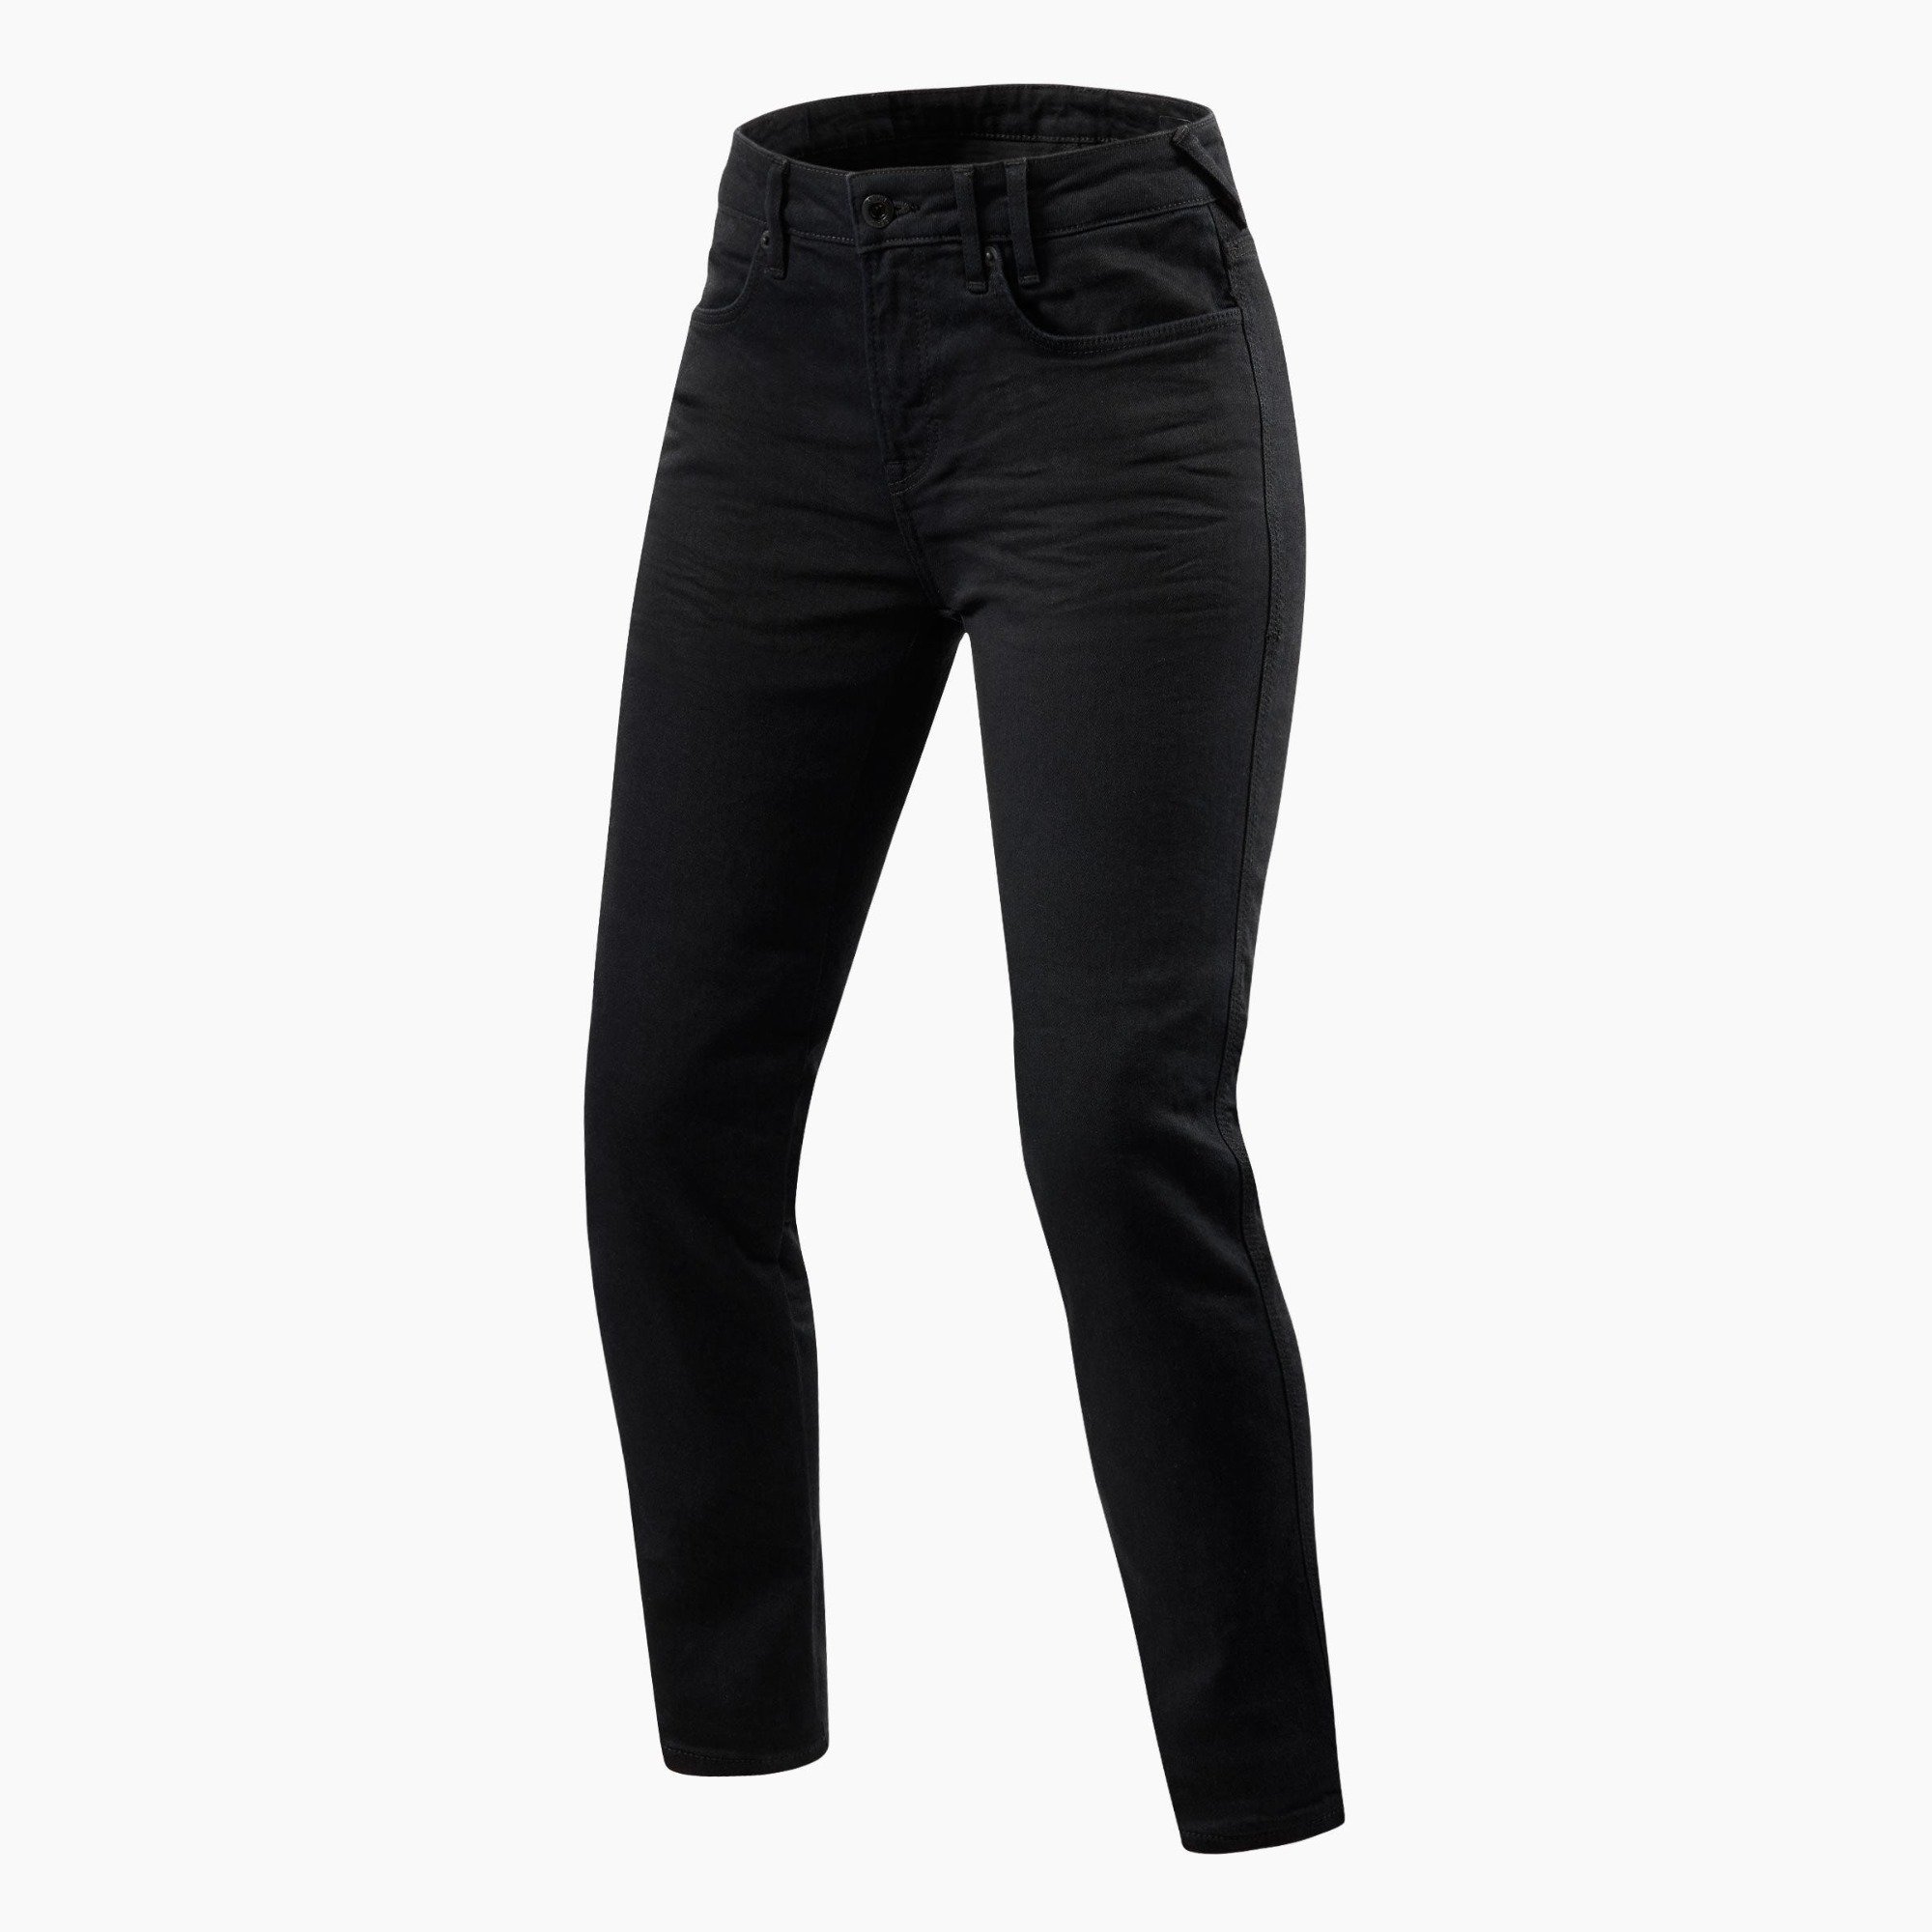 Image of REV'IT! Jeans Maple 2 Ladies SK Black Motorcycle Jeans Size L32/W34 ID 8700001342278